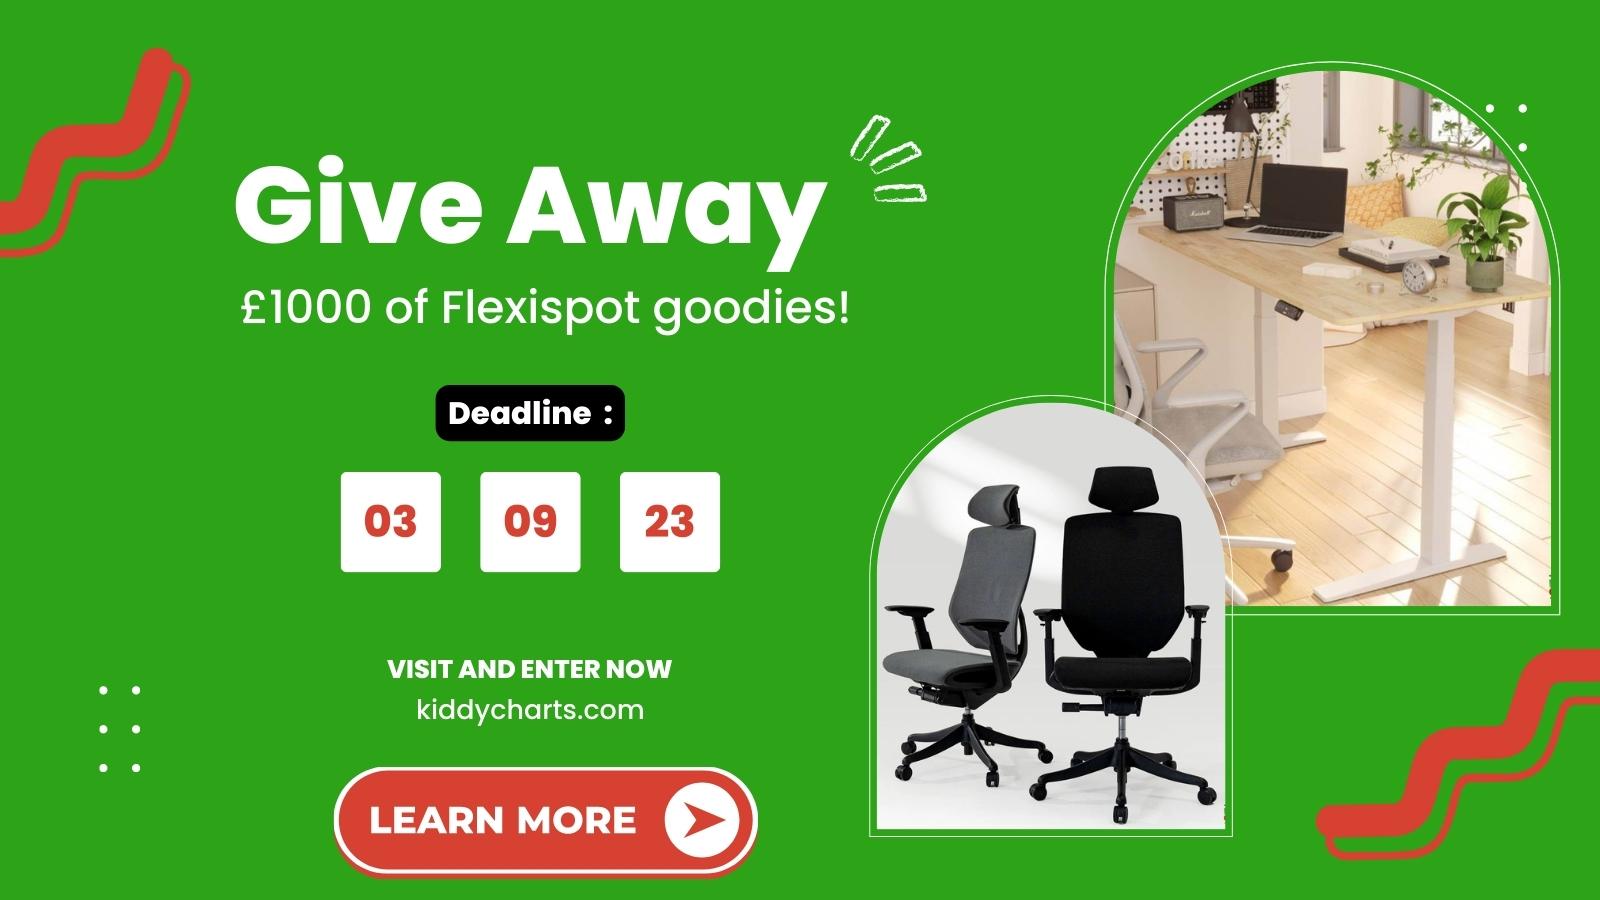 Win nearly £1000 of home office goodies from Flexispot to celebrate their 7th anniversary